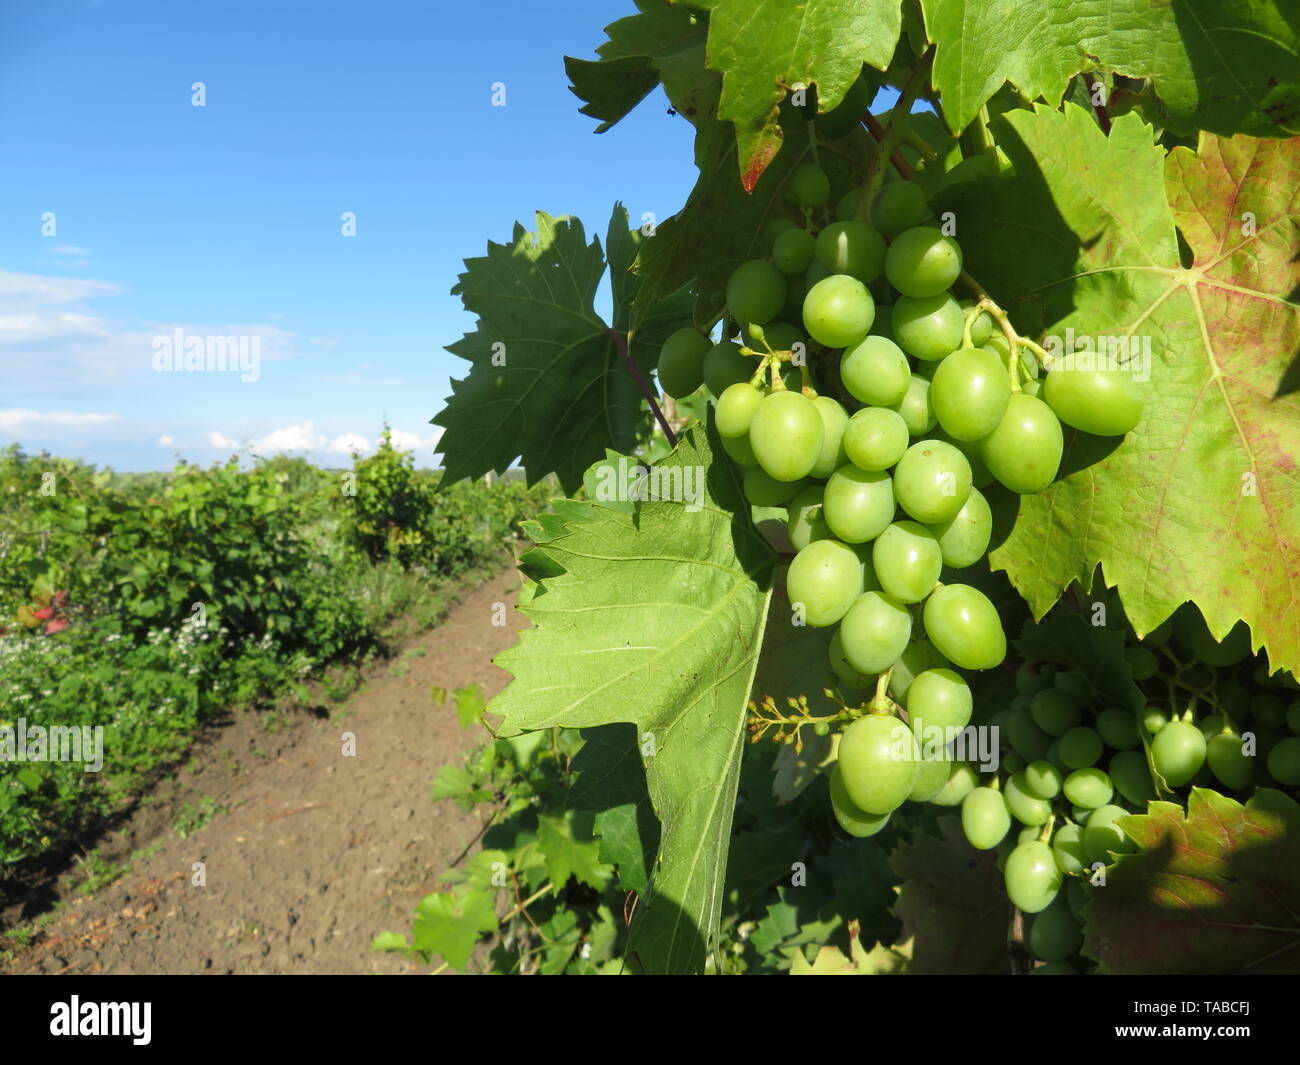 Green vineyard, bunches of white grapes growing in summer. Rural landscape with unripe grapevine and blue sky, winemaking concept Stock Photo